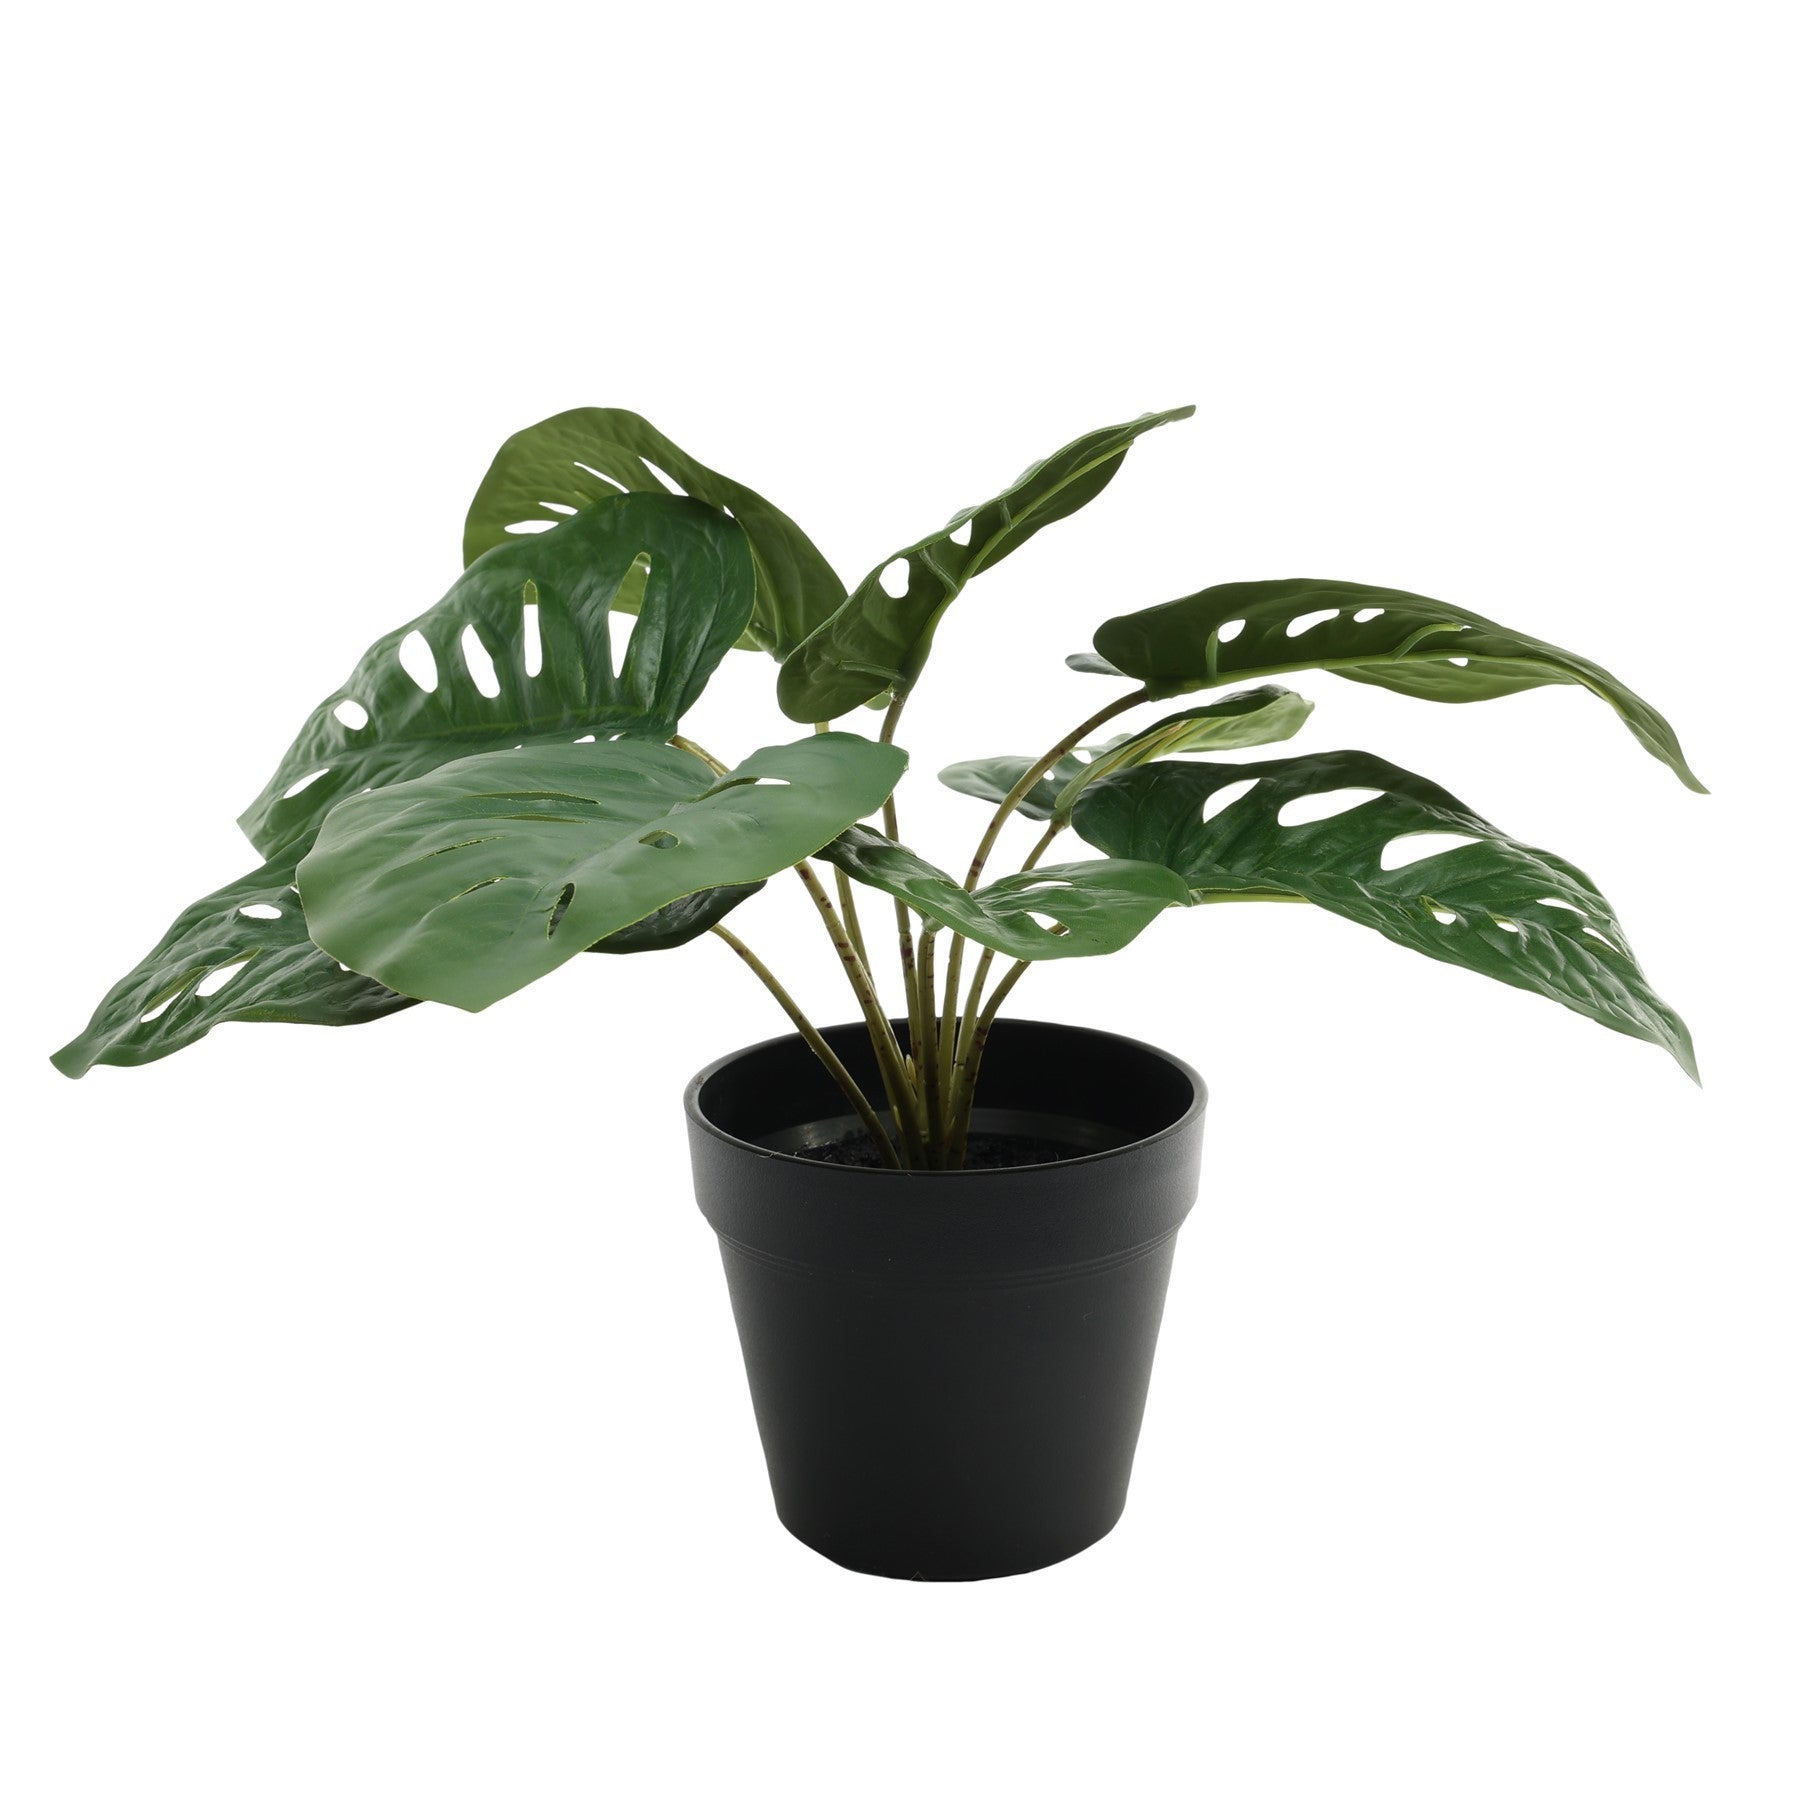 View Monstera Potted House Plant 30cm information